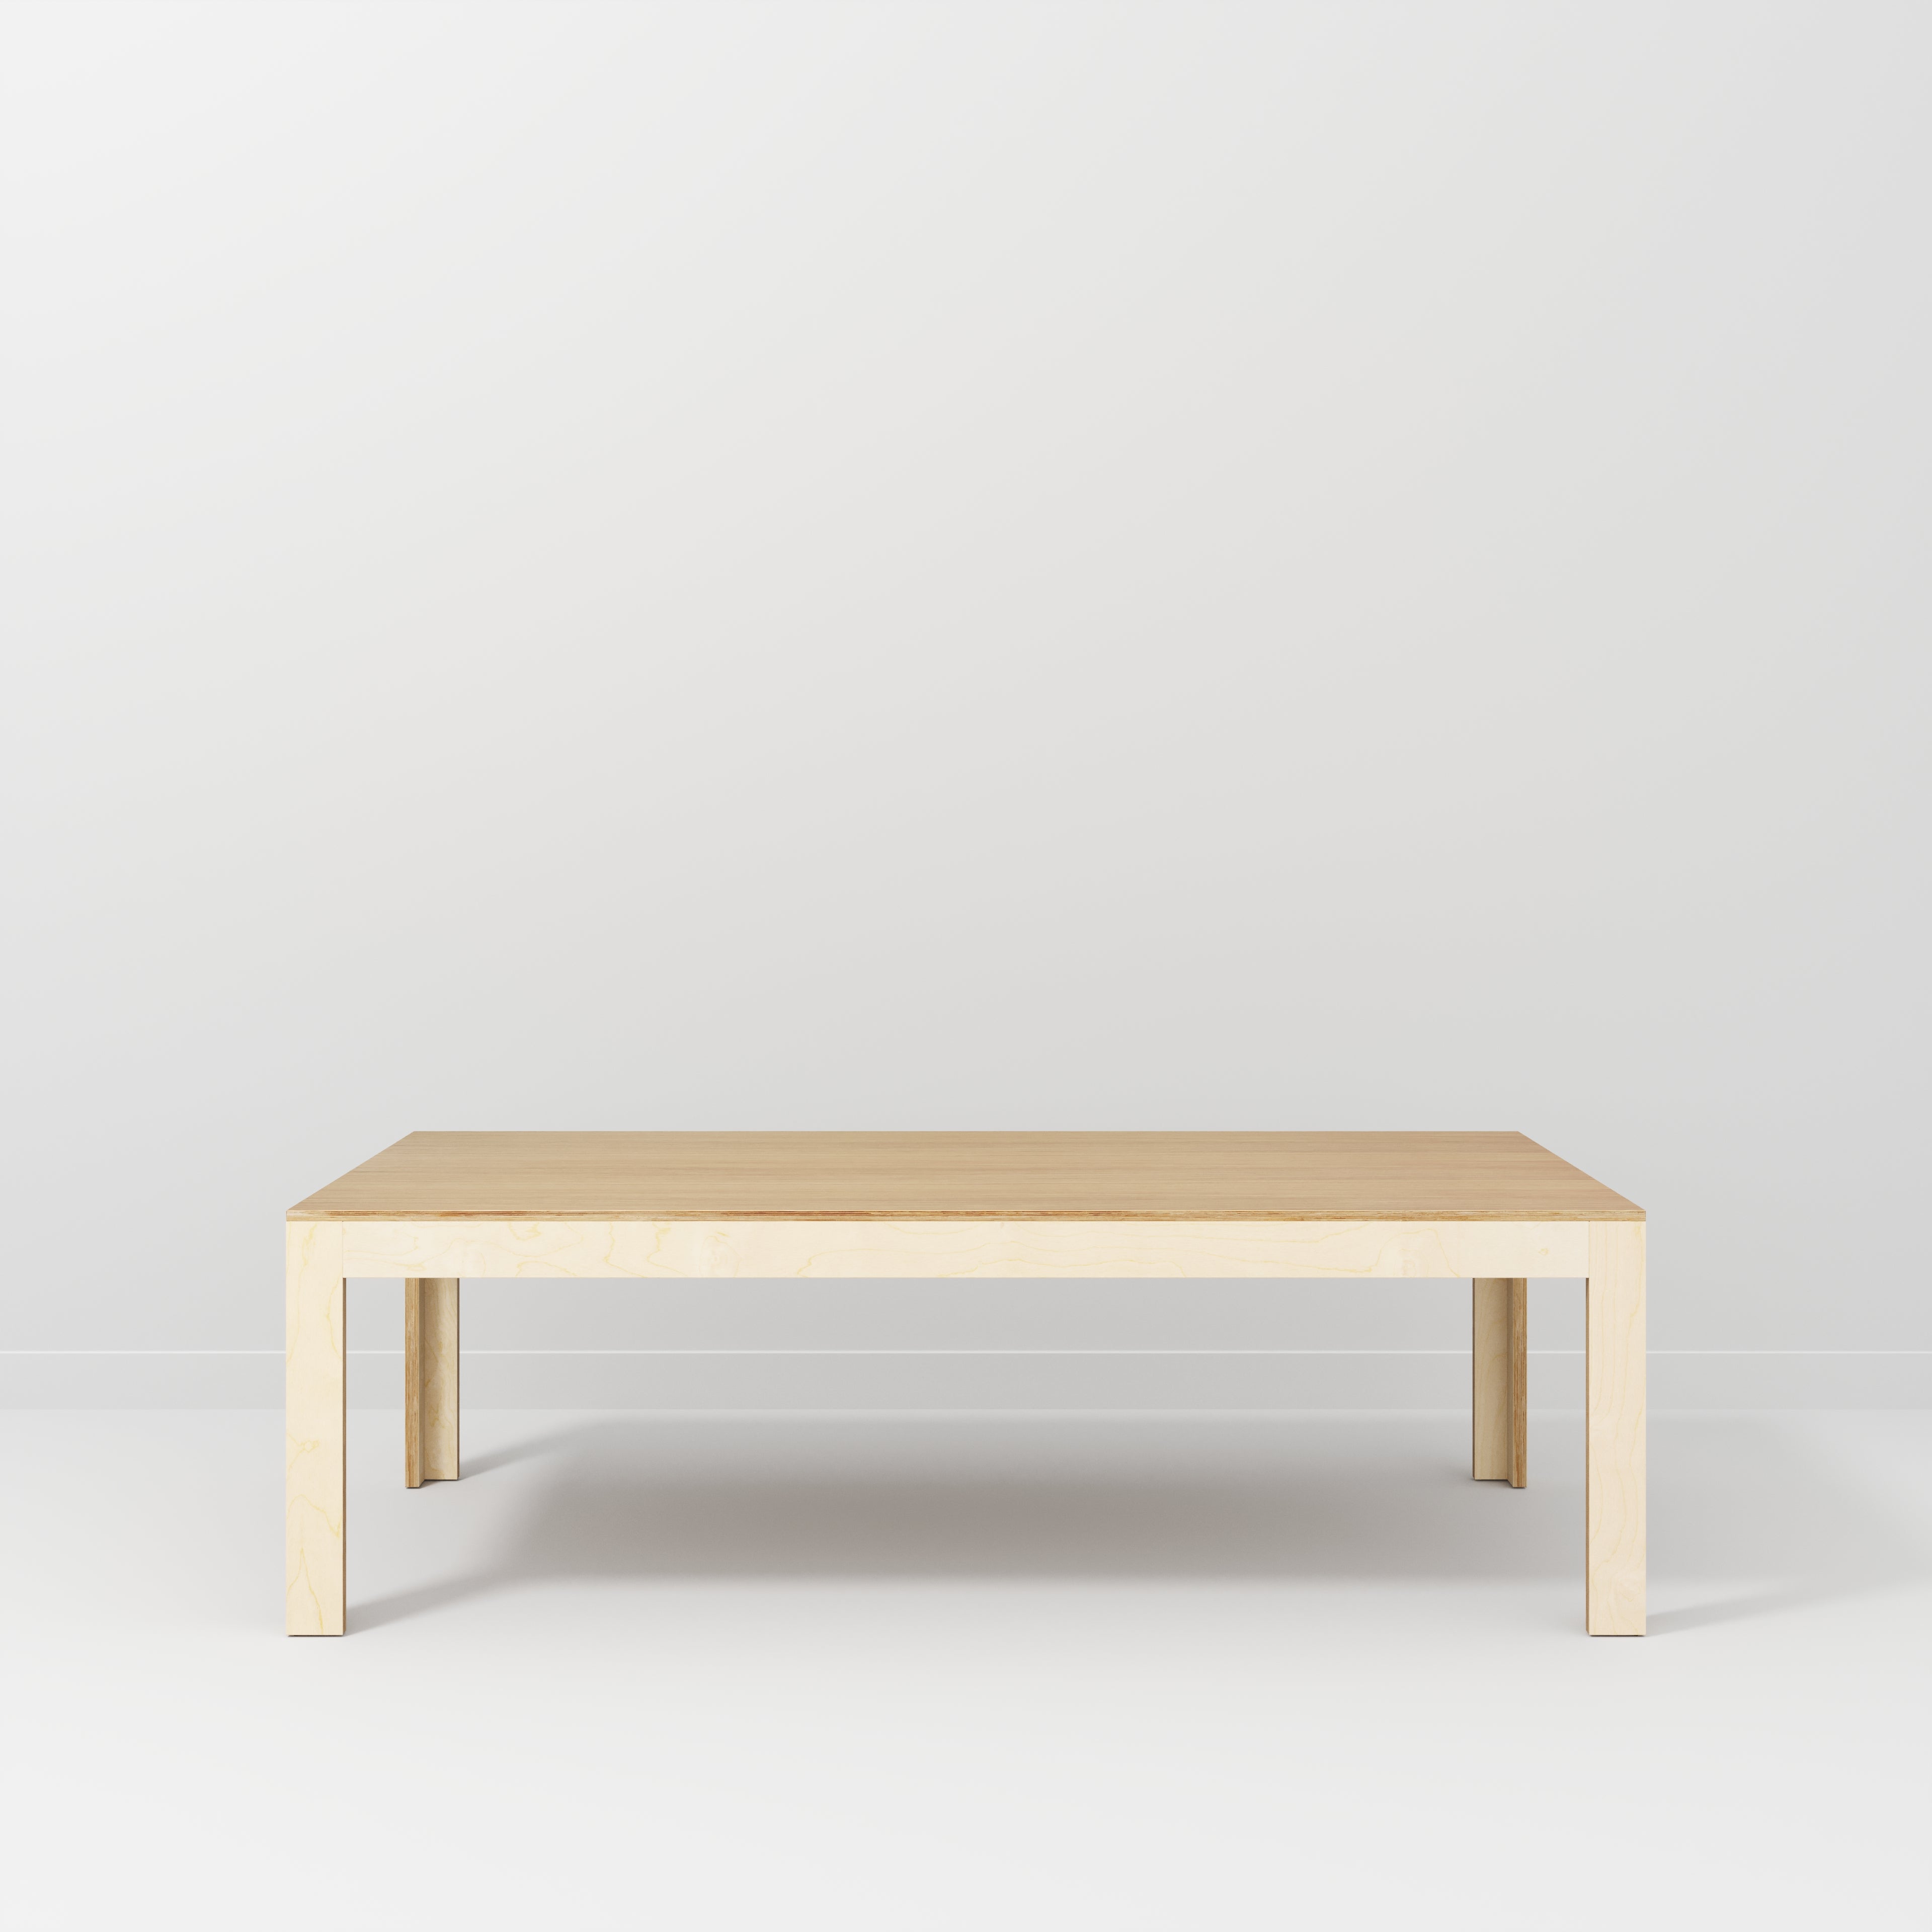 Table with Solid Frame - Plywood Oak - 2400(w) x 1200(d) x 750(h) x 750(h)